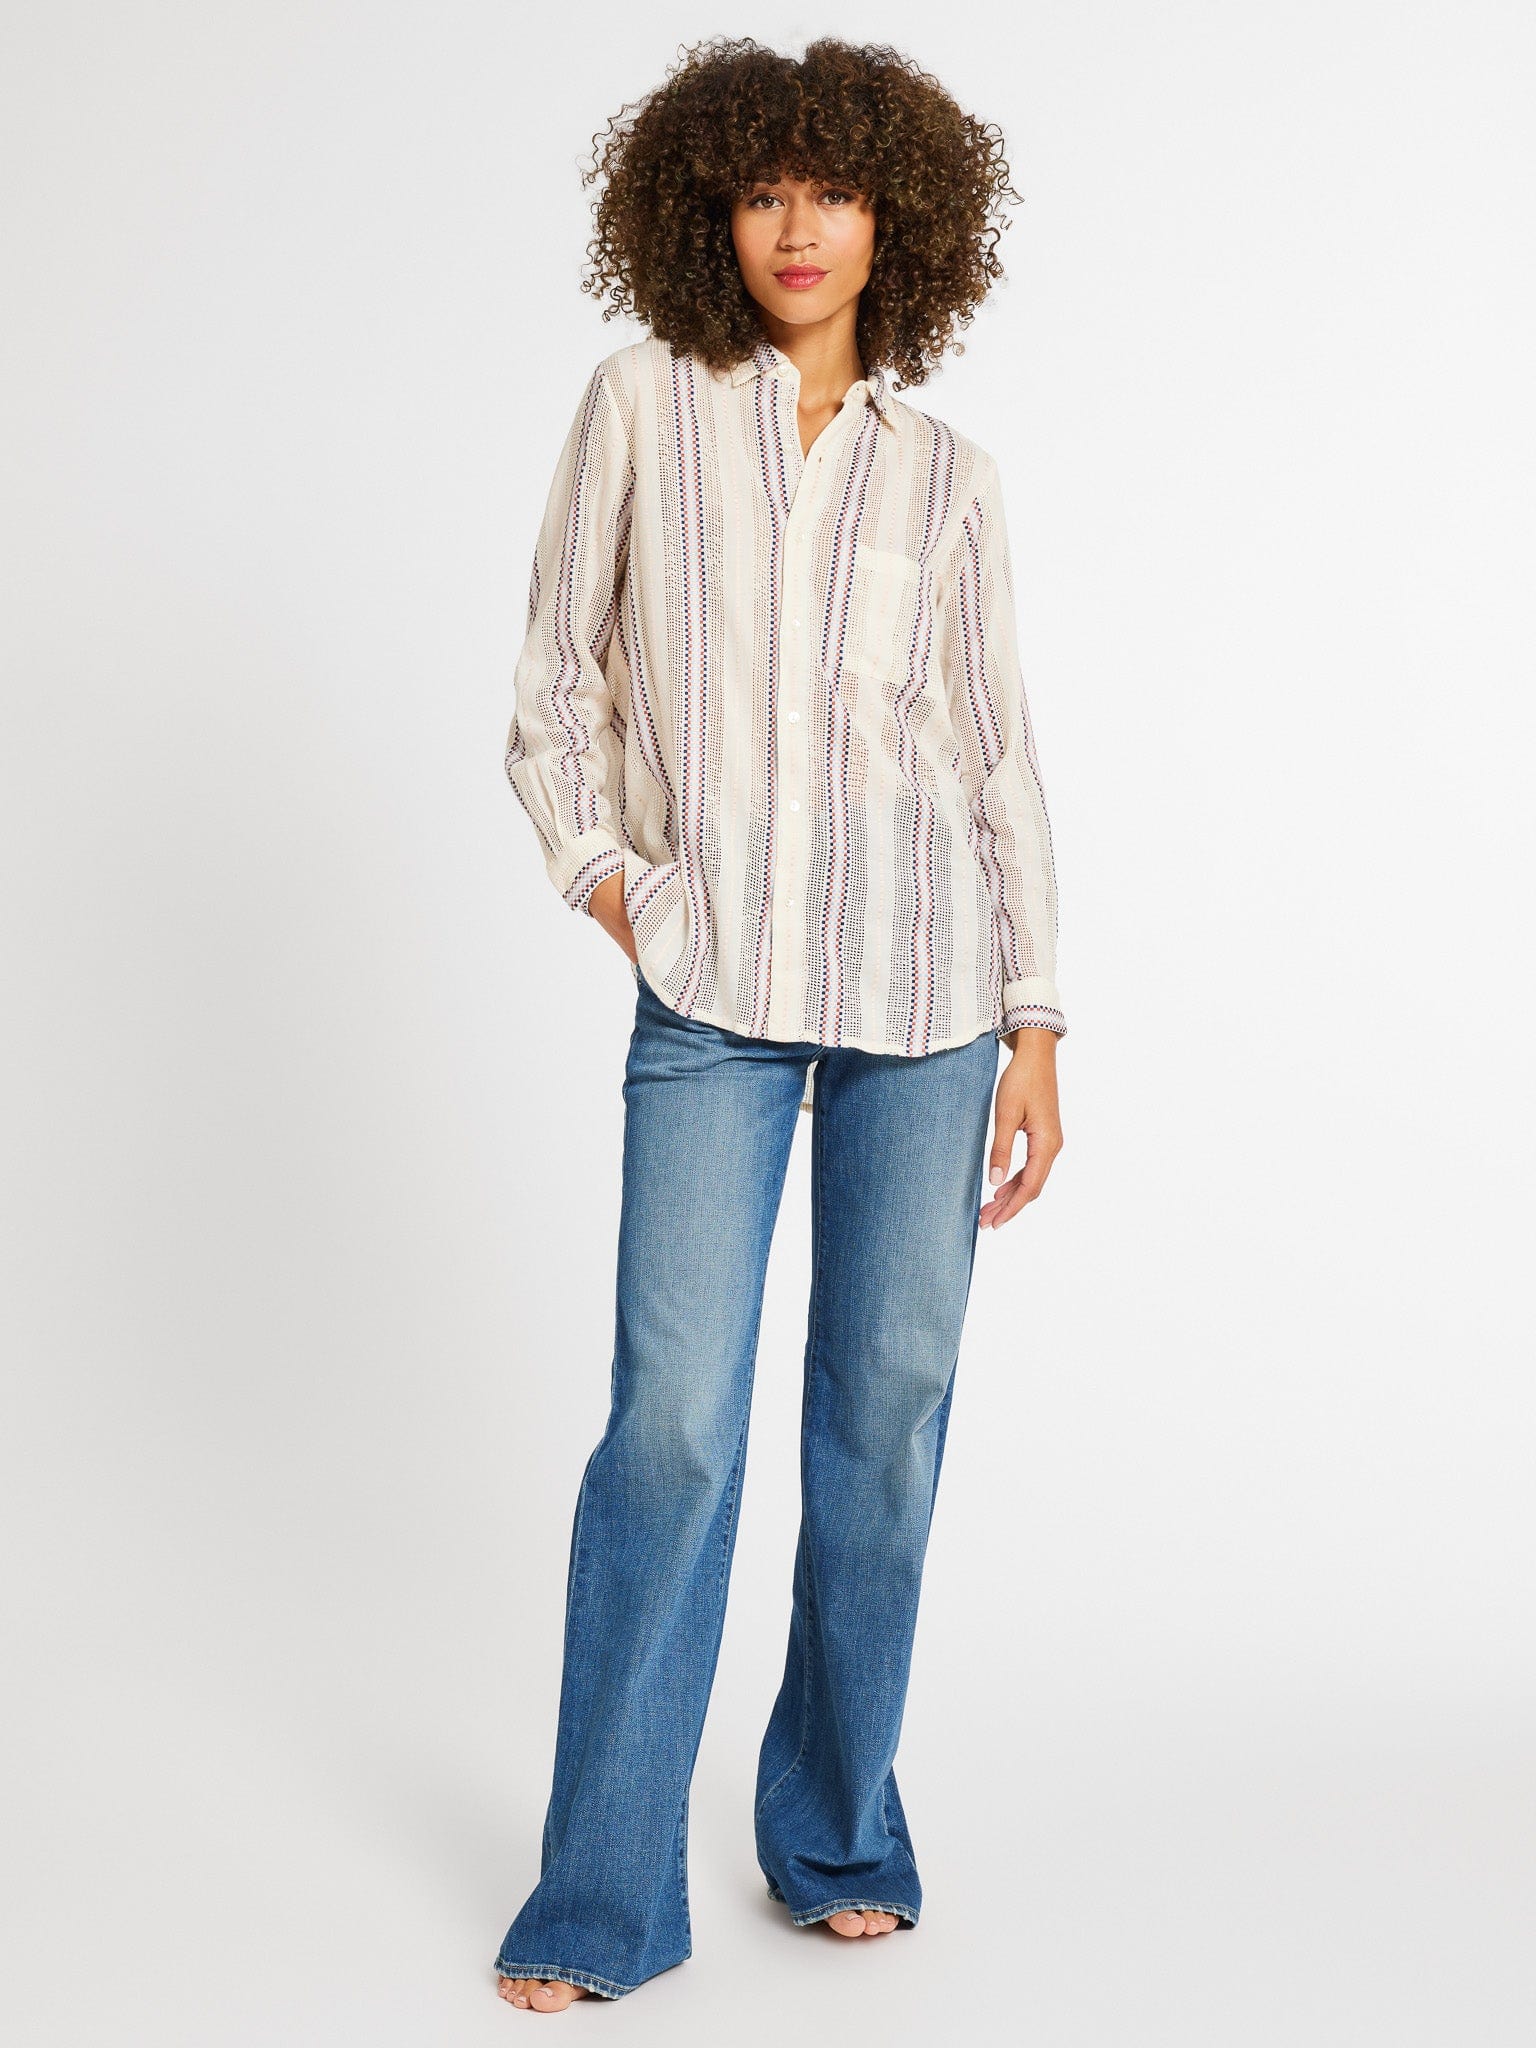 MILLE Clothing Sofia Top in O&#39;Keeffe Stripe